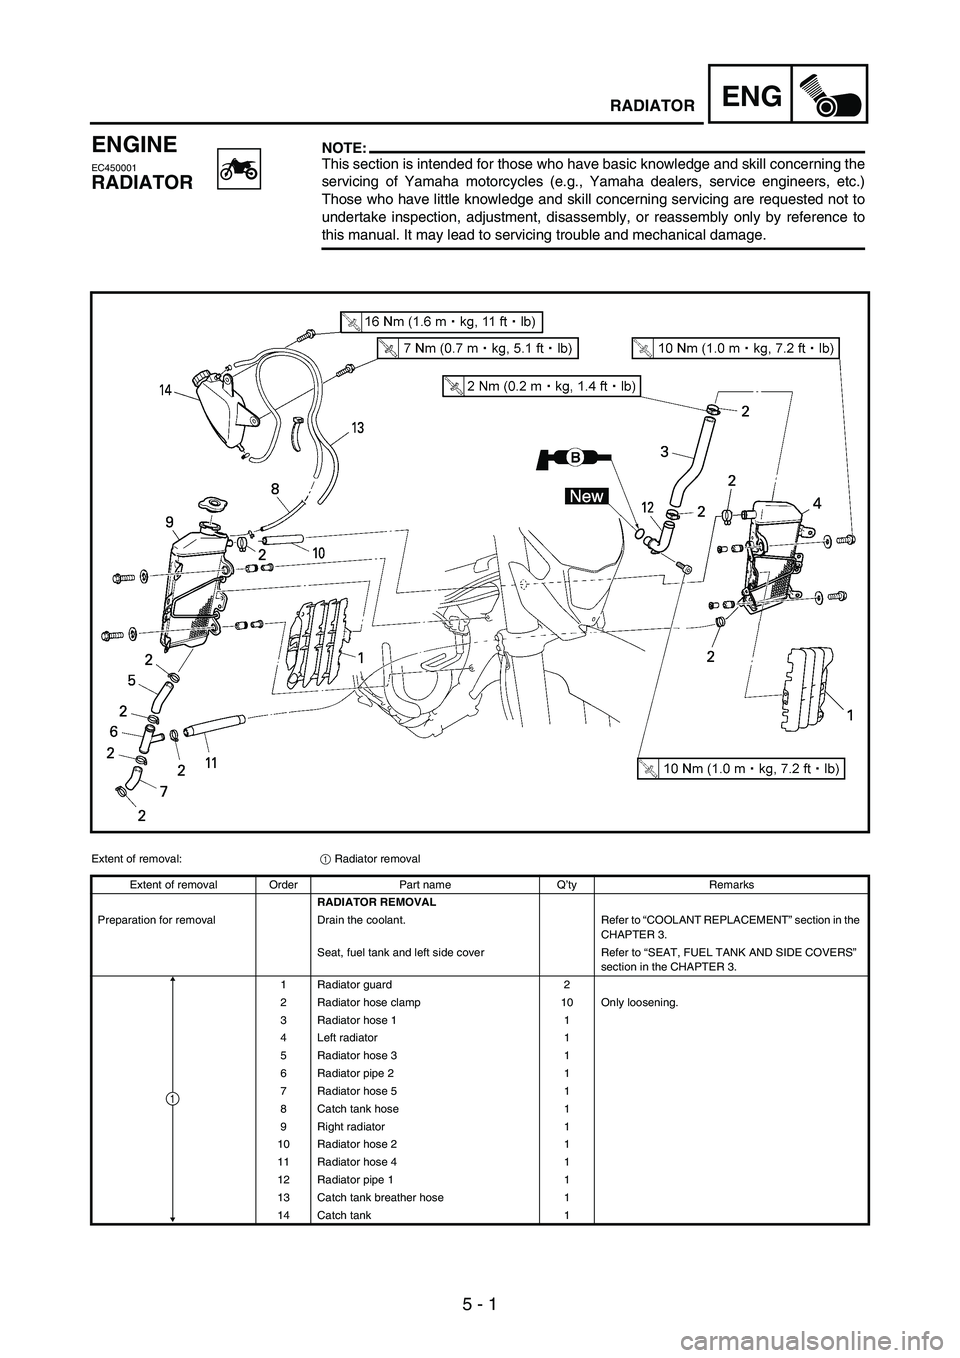 YAMAHA WR 250F 2007  Owners Manual 5 - 1
ENGRADIATOR
ENGINE
EC450001
RADIATOR
NOTE:This section is intended for those who have basic knowledge and skill concerning the
servicing of Yamaha motorcycles (e.g., Yamaha dealers, service engi